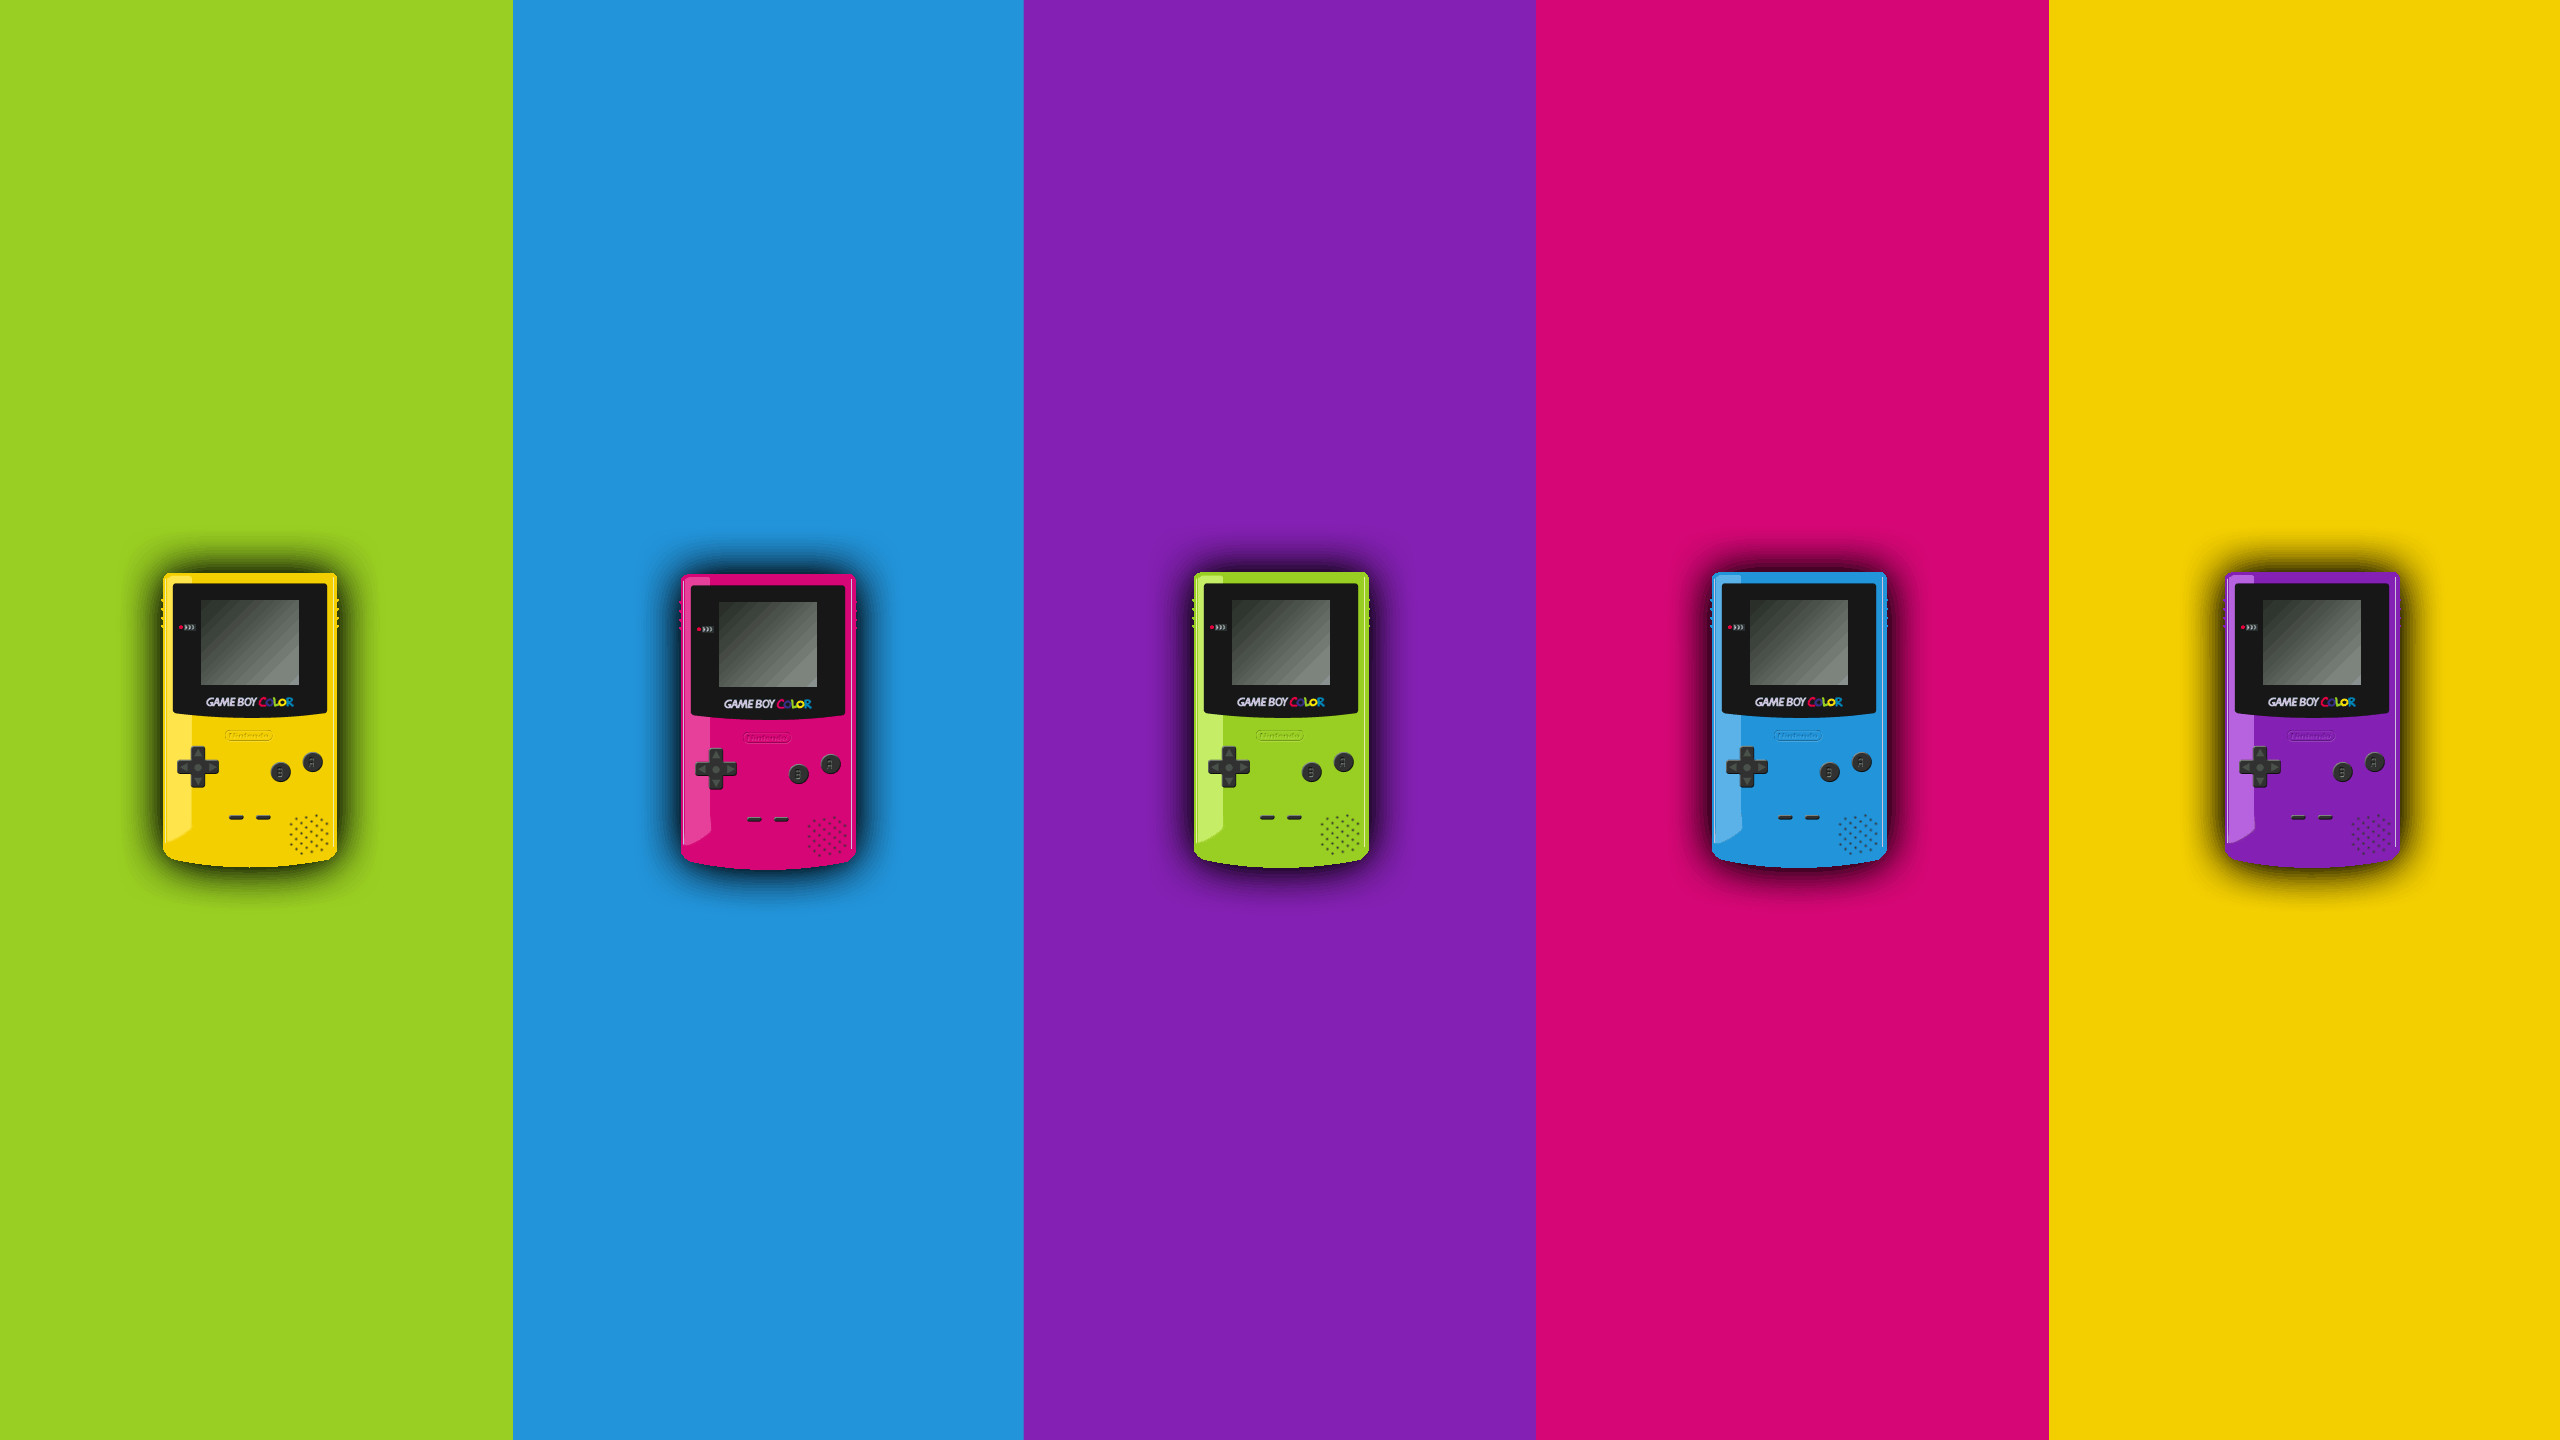 Lexica  Colorful gaming wallpaper insanely complex gameboyvibrant colorsmobile  wallpaper